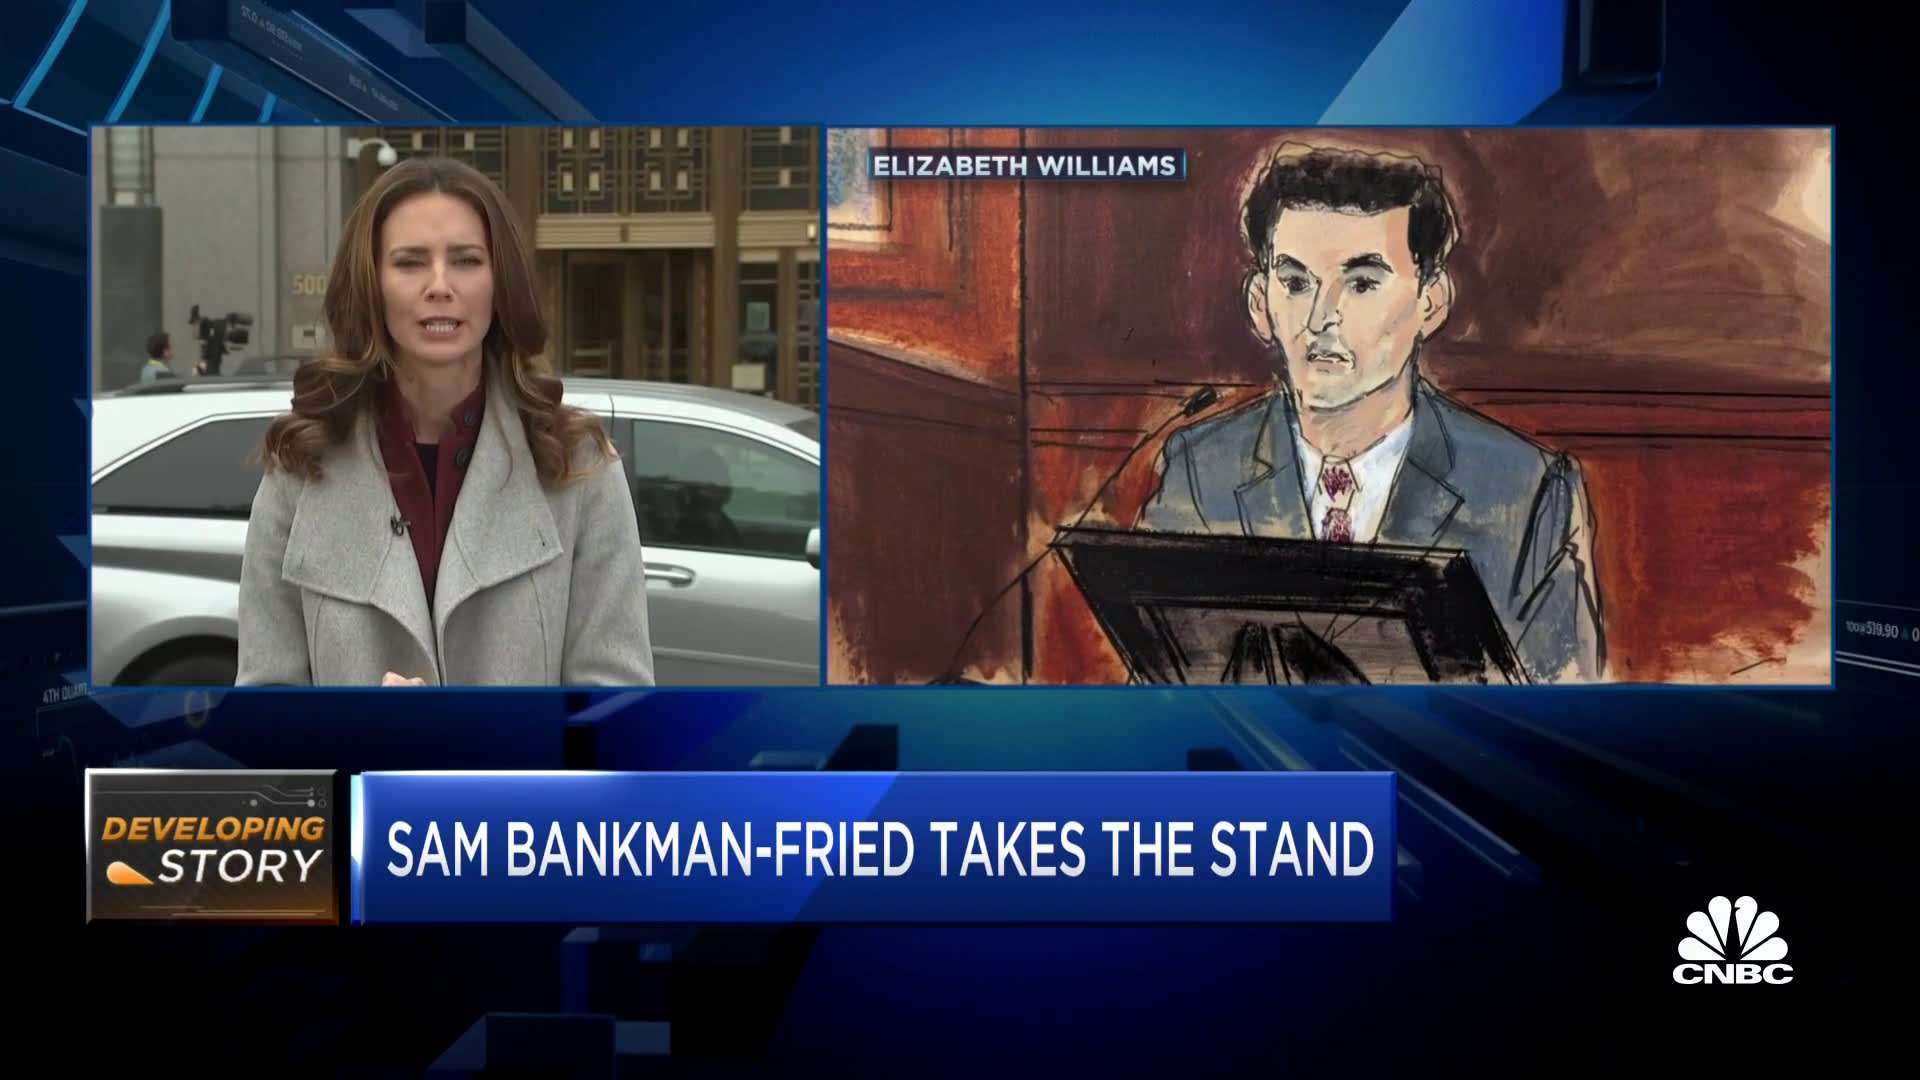 Sam Bankman-Fried takes the stand